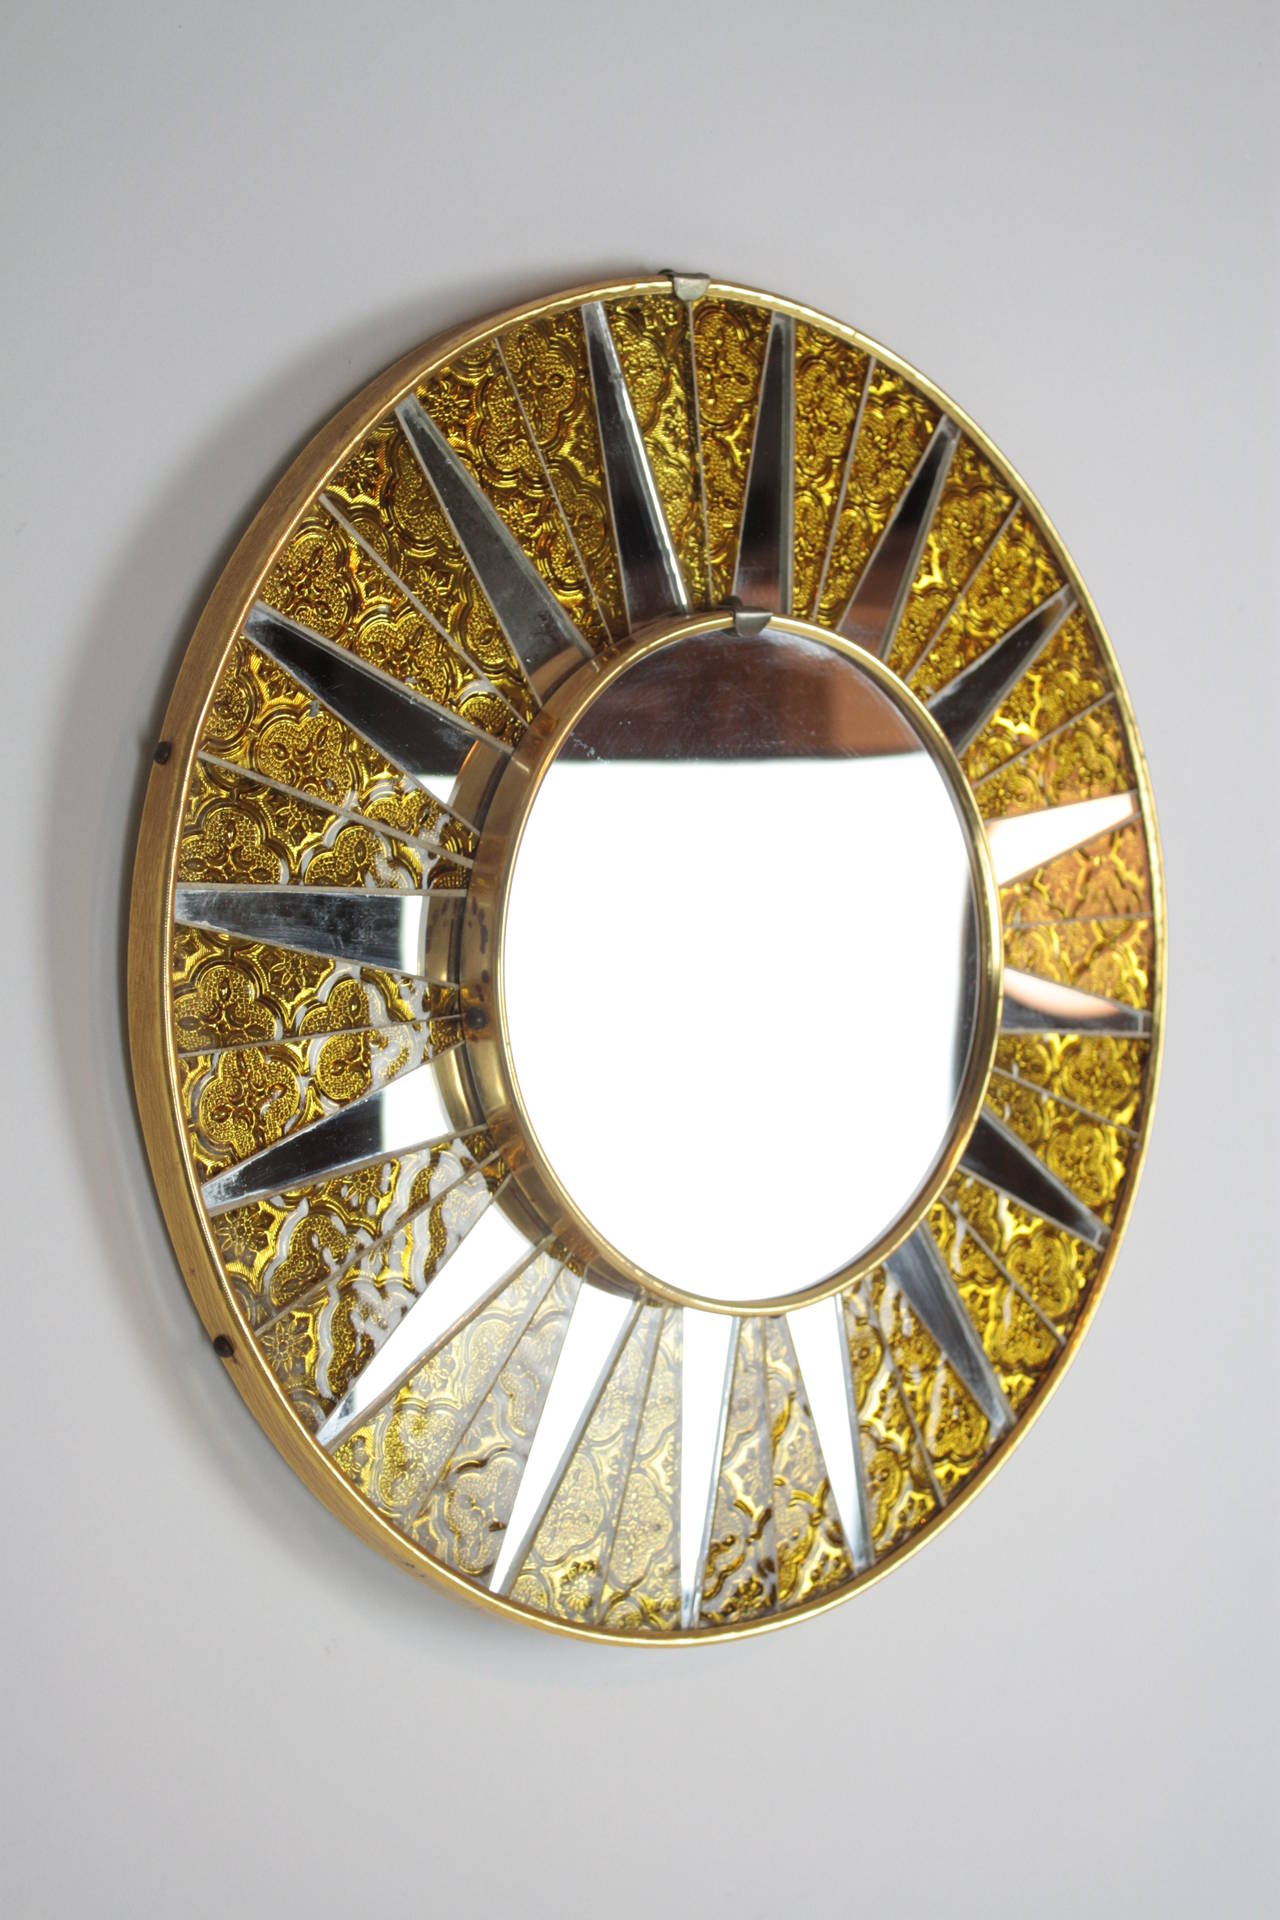 Amazing circular mirror framed with pieces of glass and mirrors creating a sun image.
Spain, 1960s.